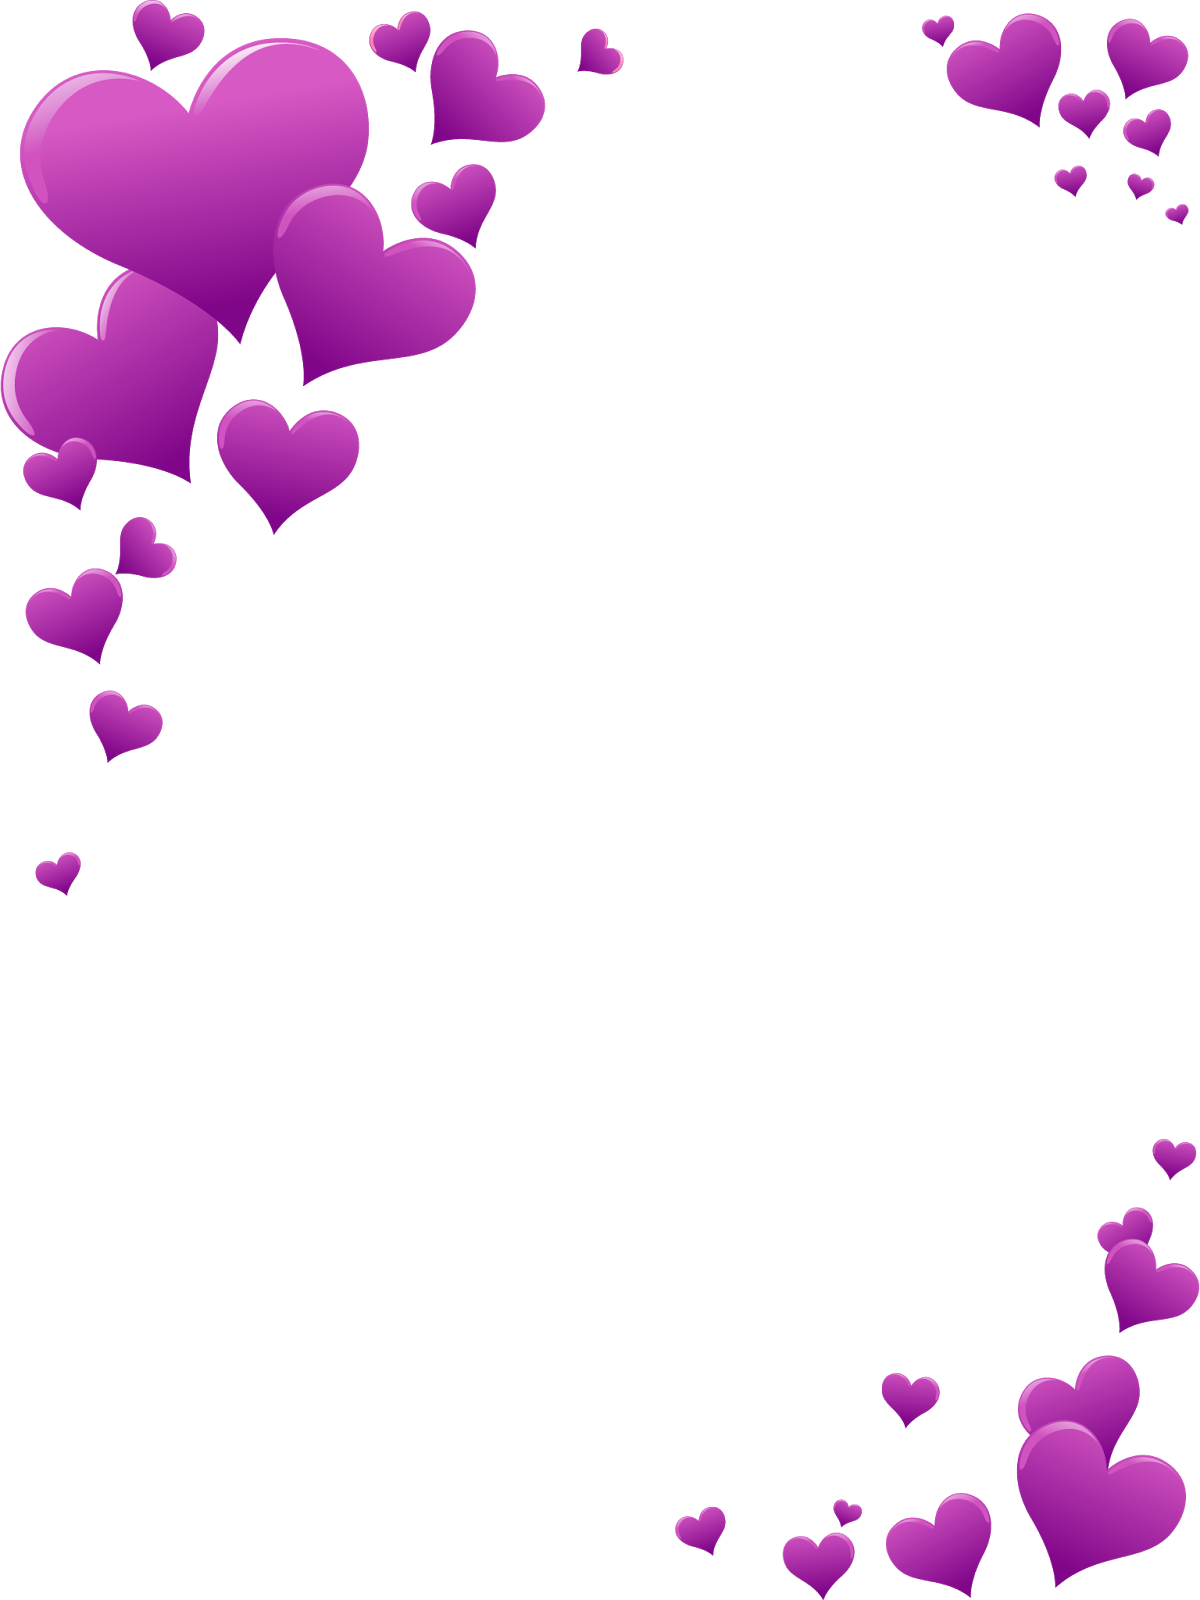 Floating Purple Hearts Love Background PNG